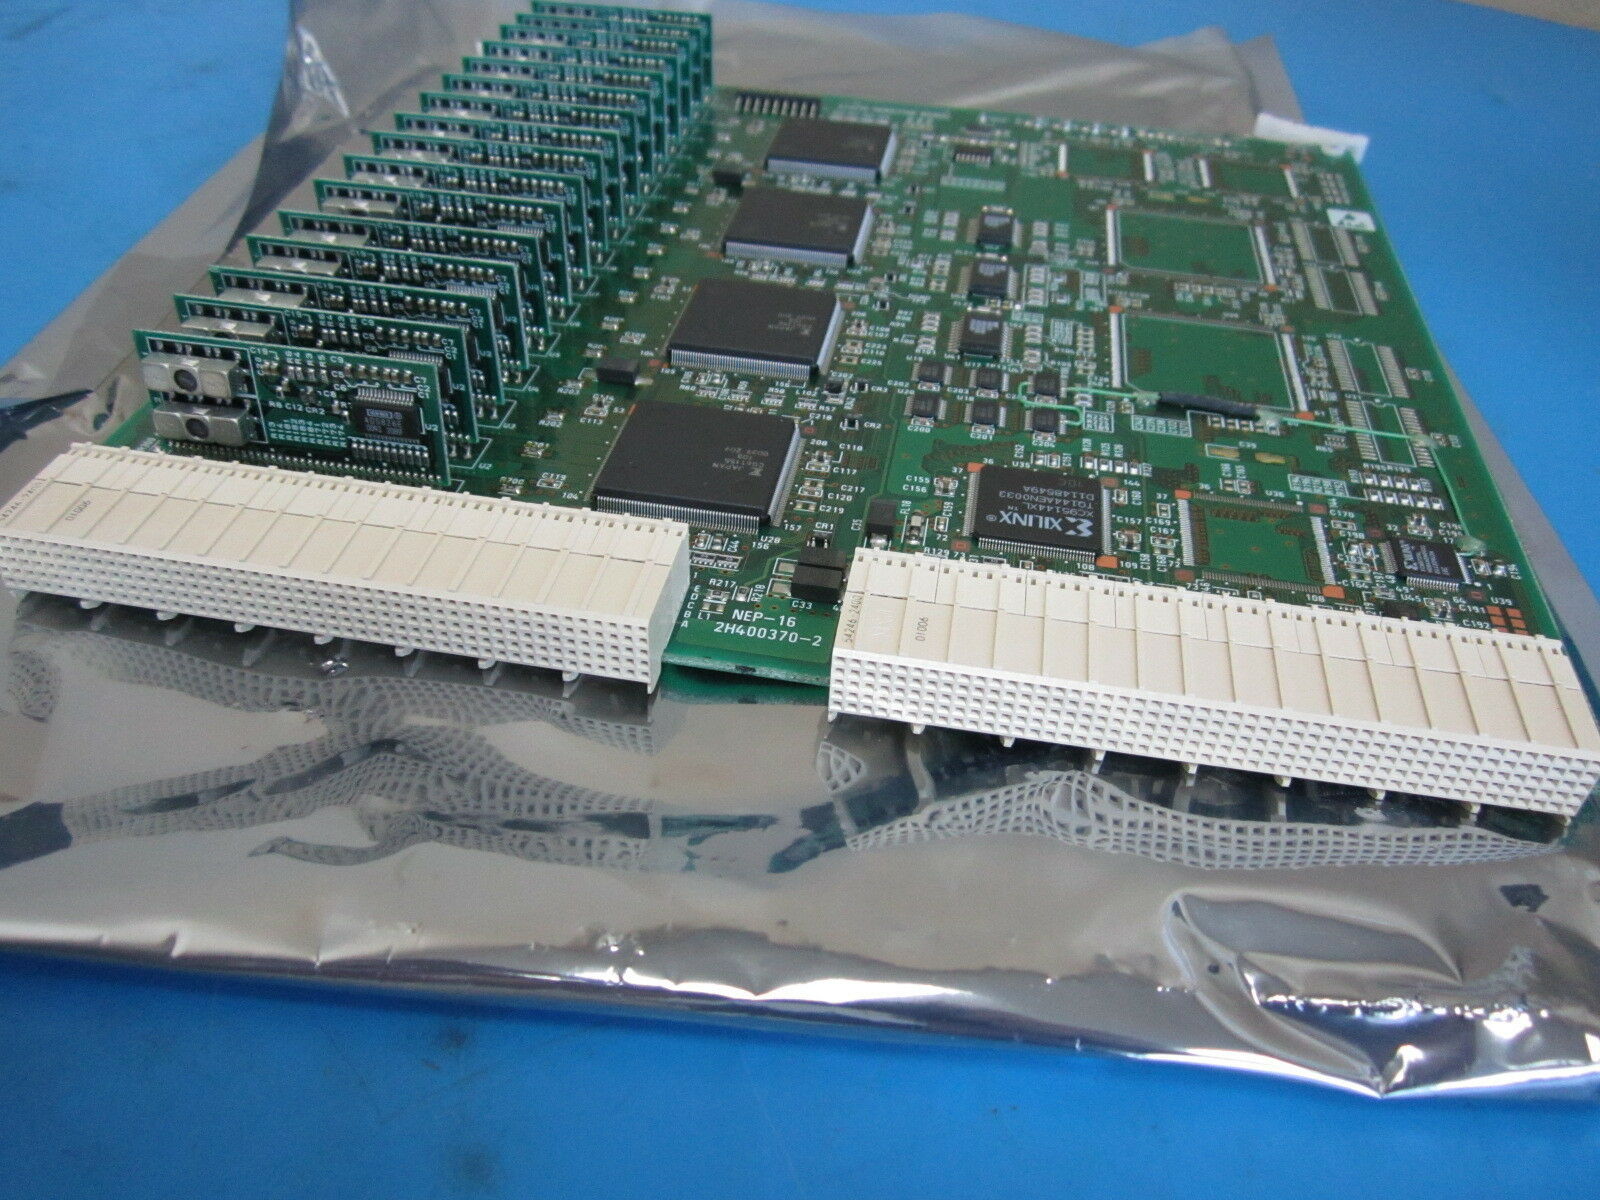 Toshiba Medical Systems BSM31-3099 A3 PCB Beam Former Board Ultrasound Imaging DIAGNOSTIC ULTRASOUND MACHINES FOR SALE